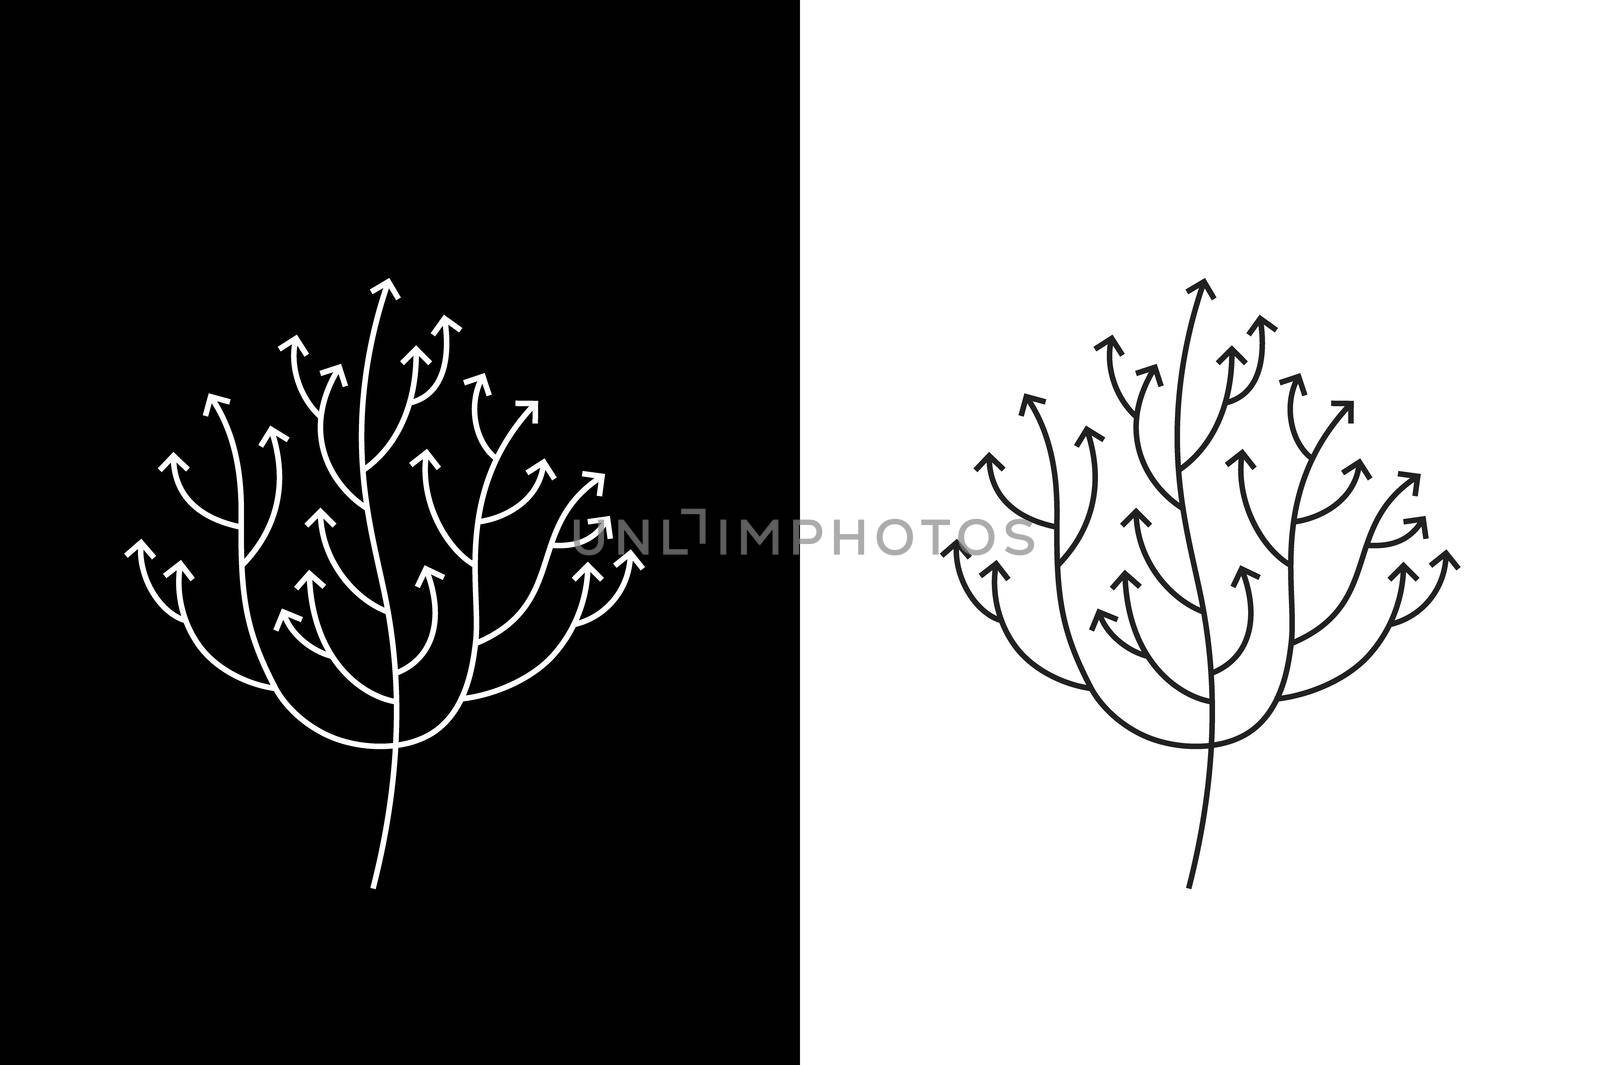 Abstract Growing Arrow Tree That Symbolizes Development And Growth. Conceptual Vector Illustration.